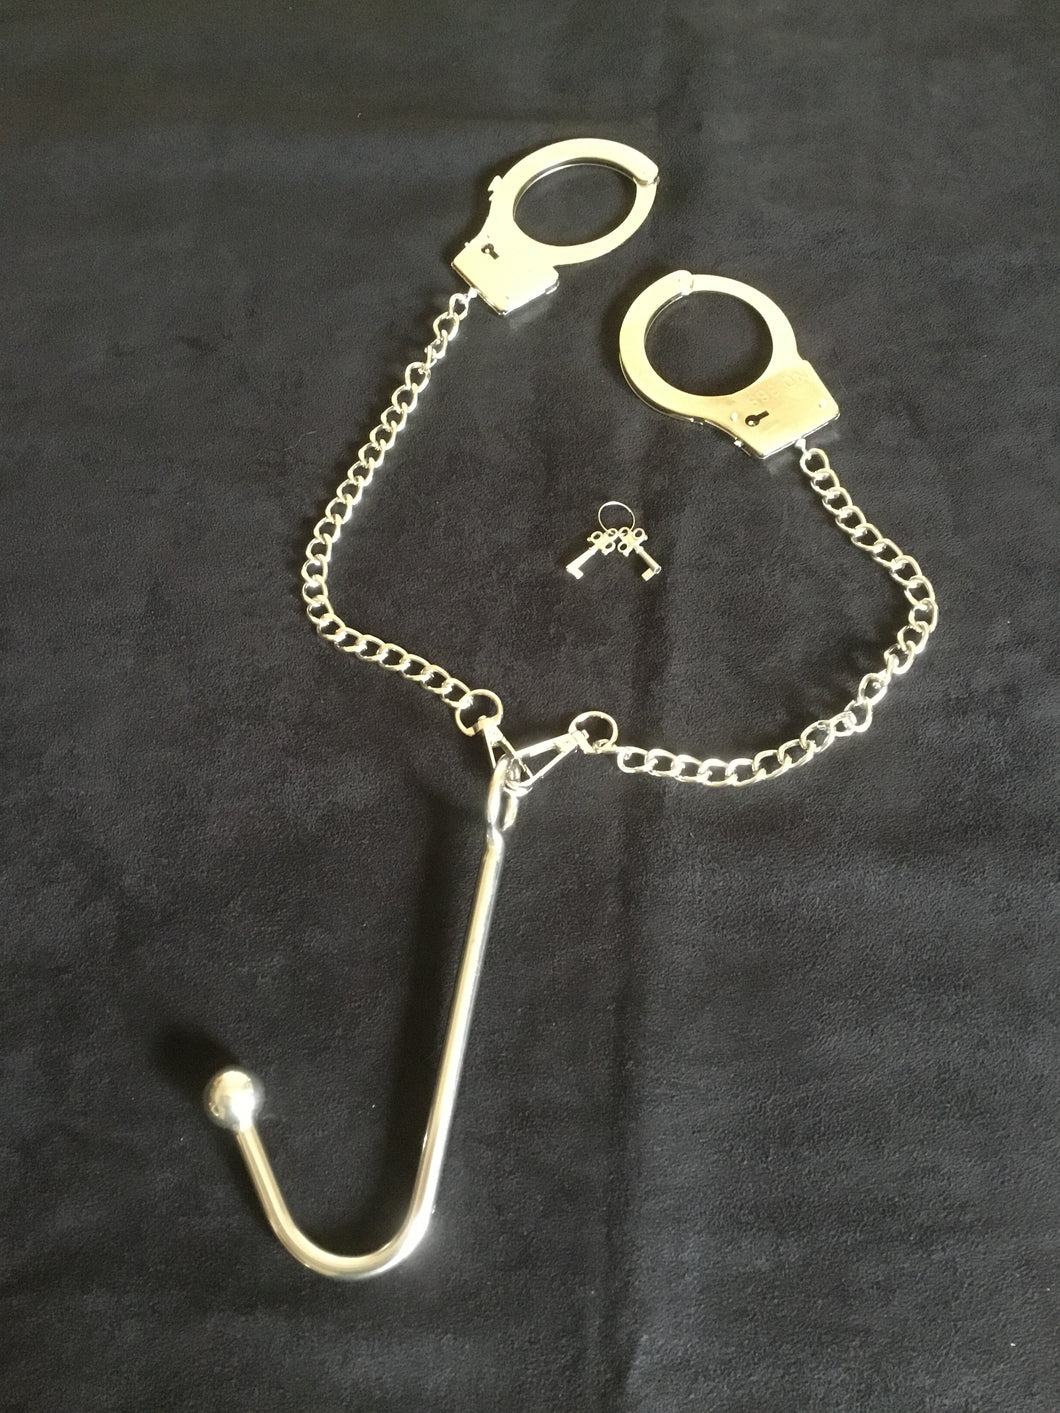 Metal Handcuffs With Anal Hook